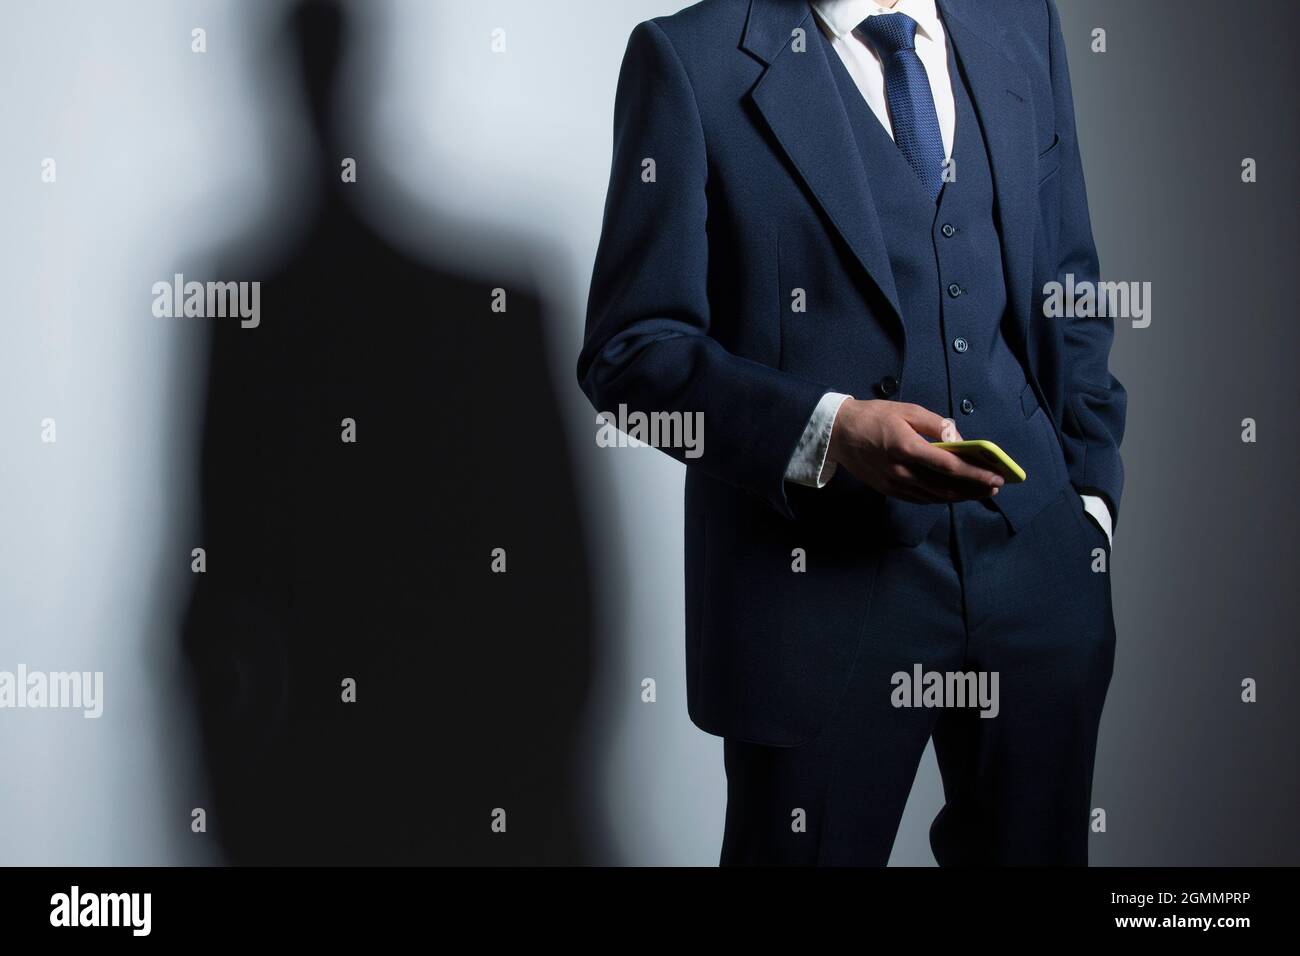 Businessman in suit holding smart phone Stock Photo